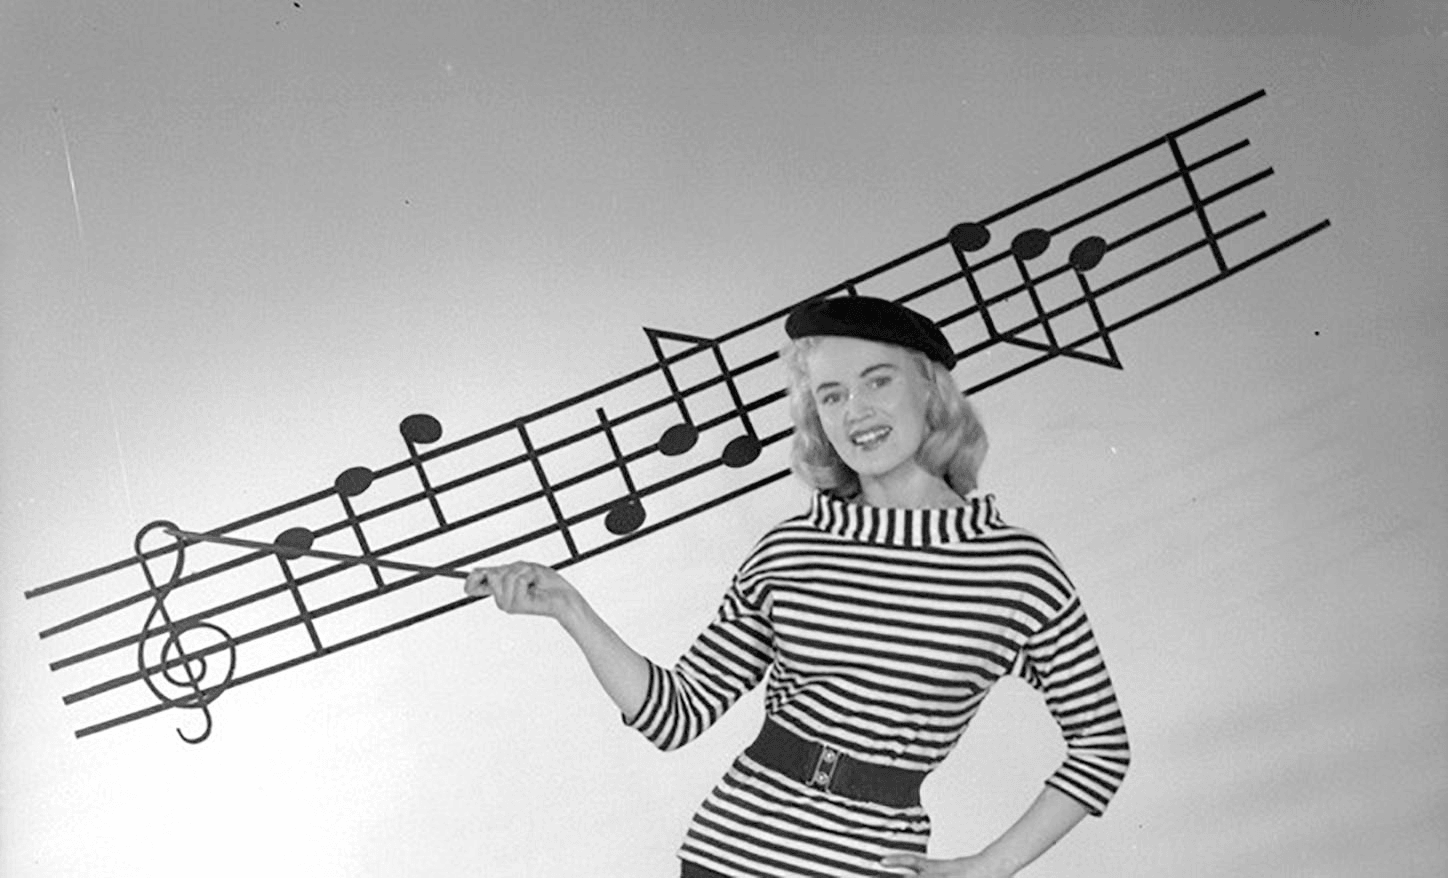 Black and white archive studio photograph. Woman in beret pointing with baton at stave of musical notation on a wall.